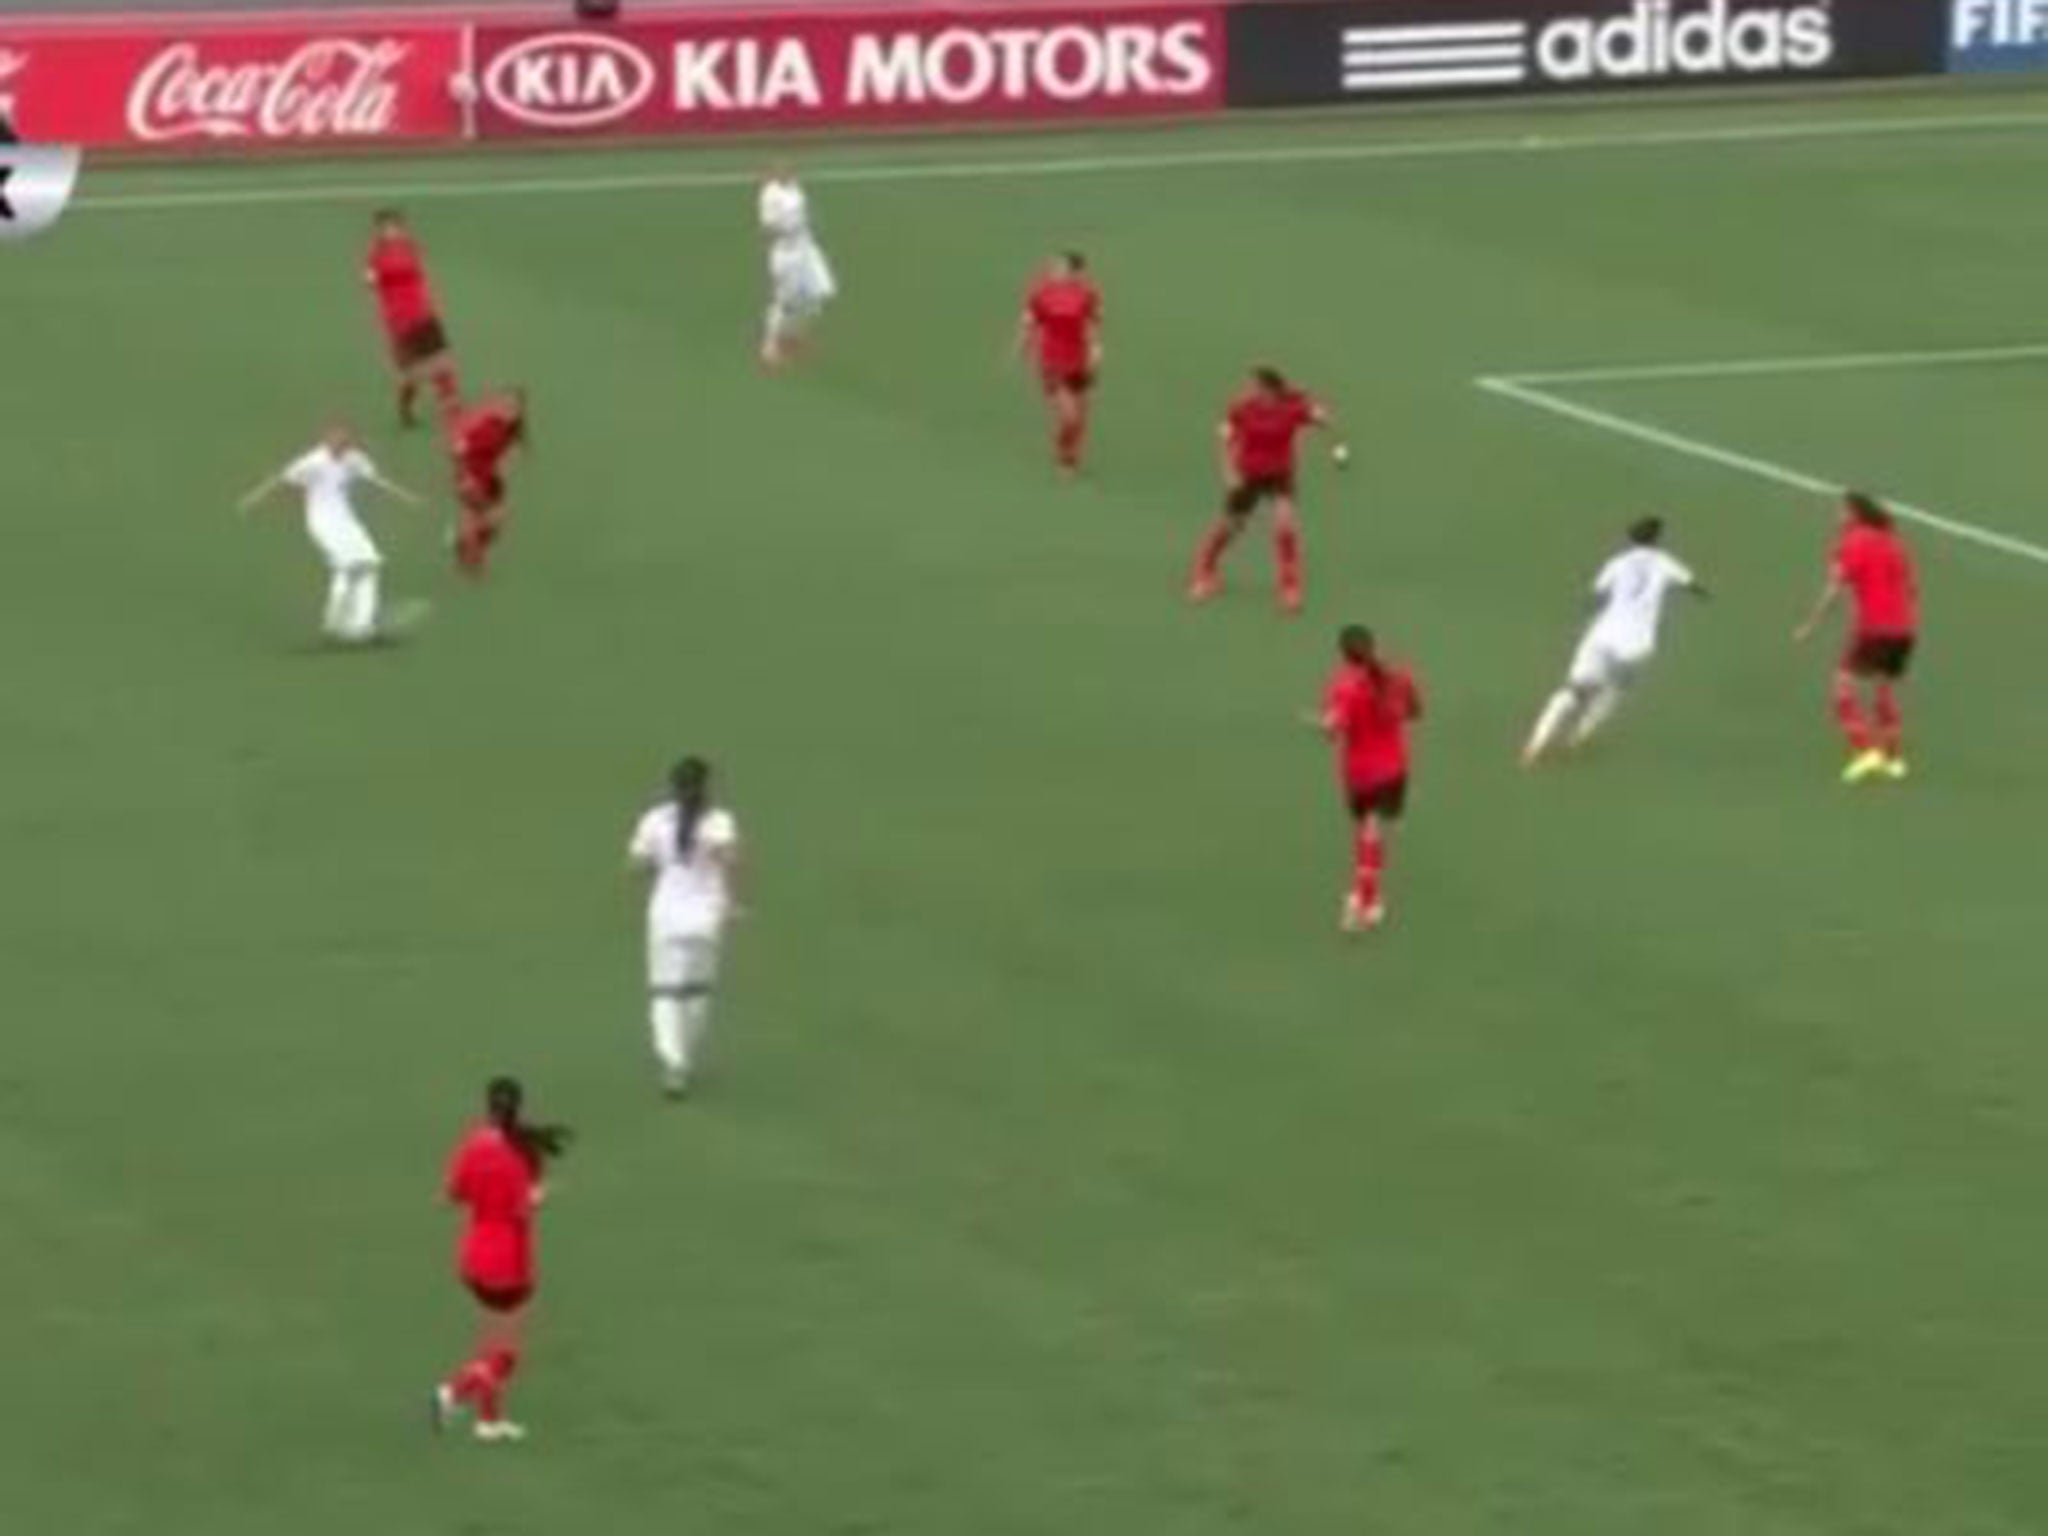 Beth Mead scored a stunning goal for England at the women's U20 World Cup